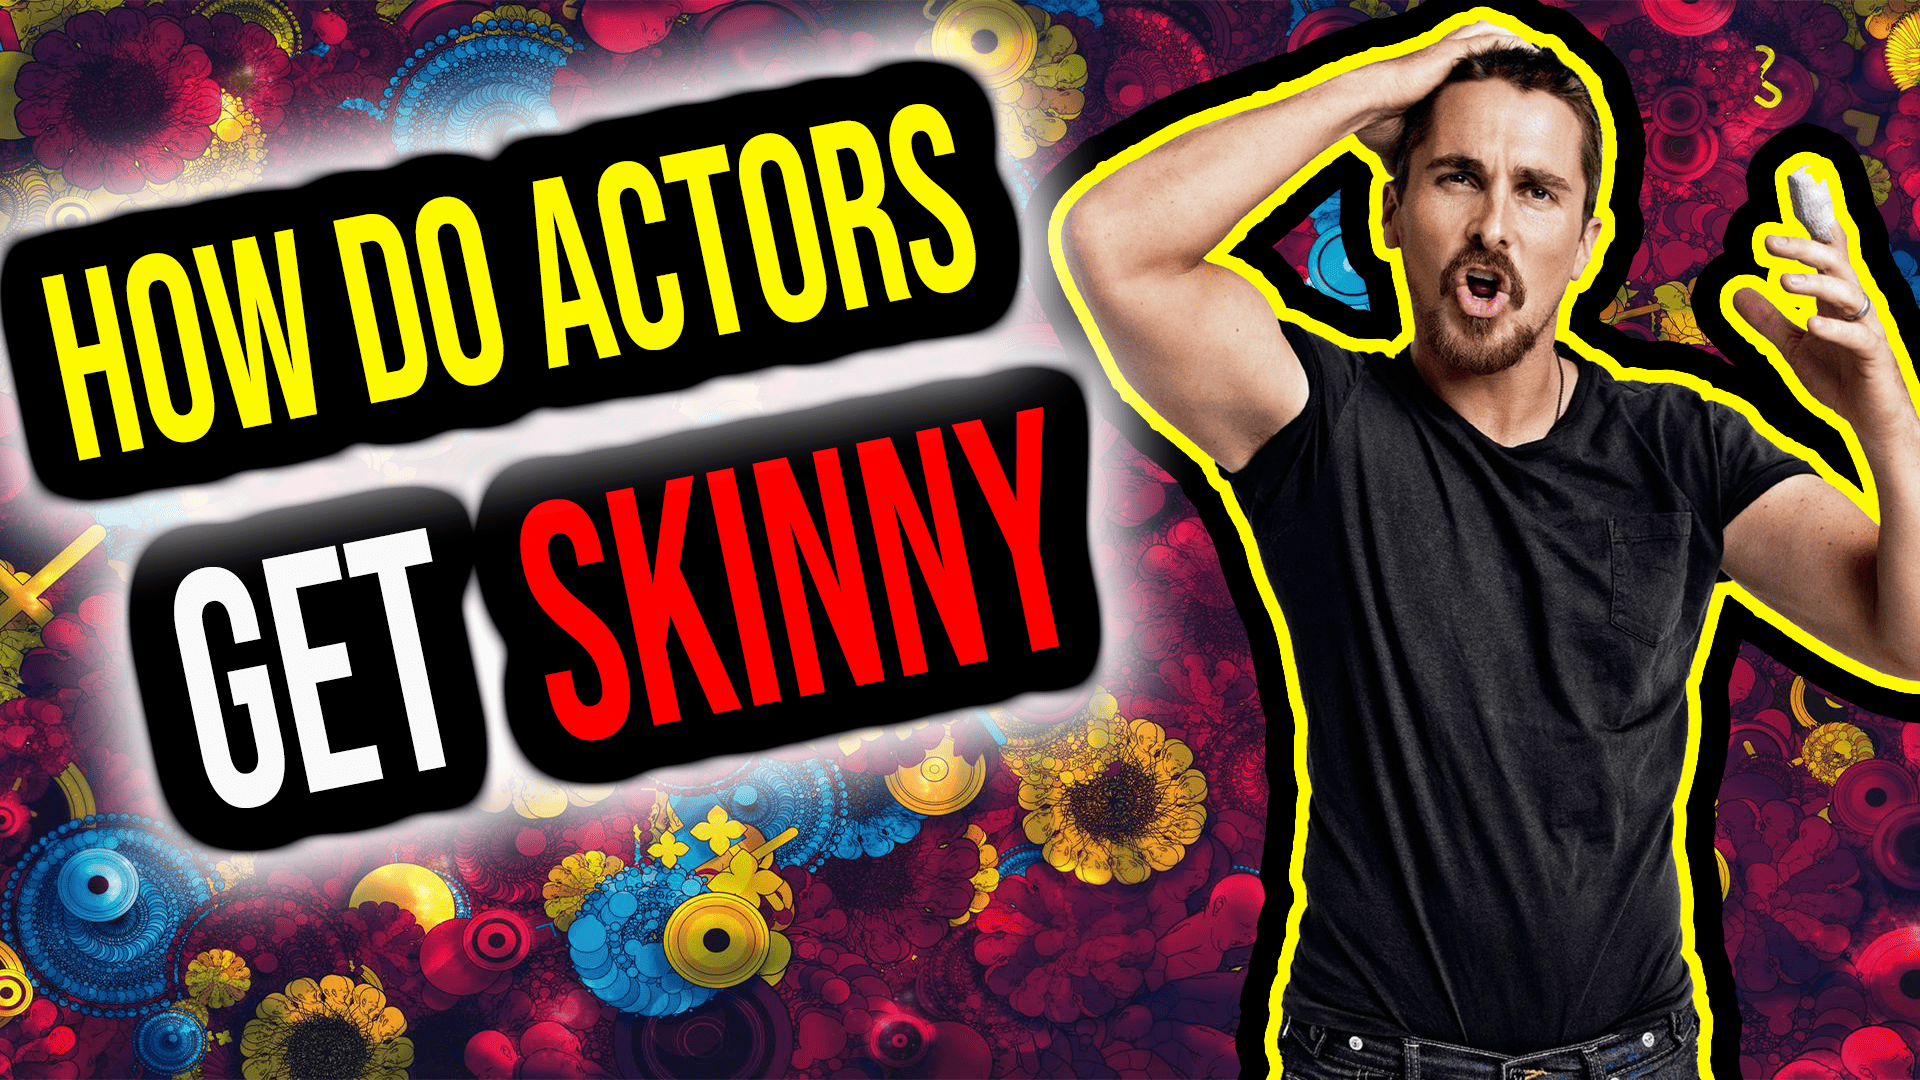 How Do Actors Get Skinny For Roles? The Science Behind Dramatic Weight Loss